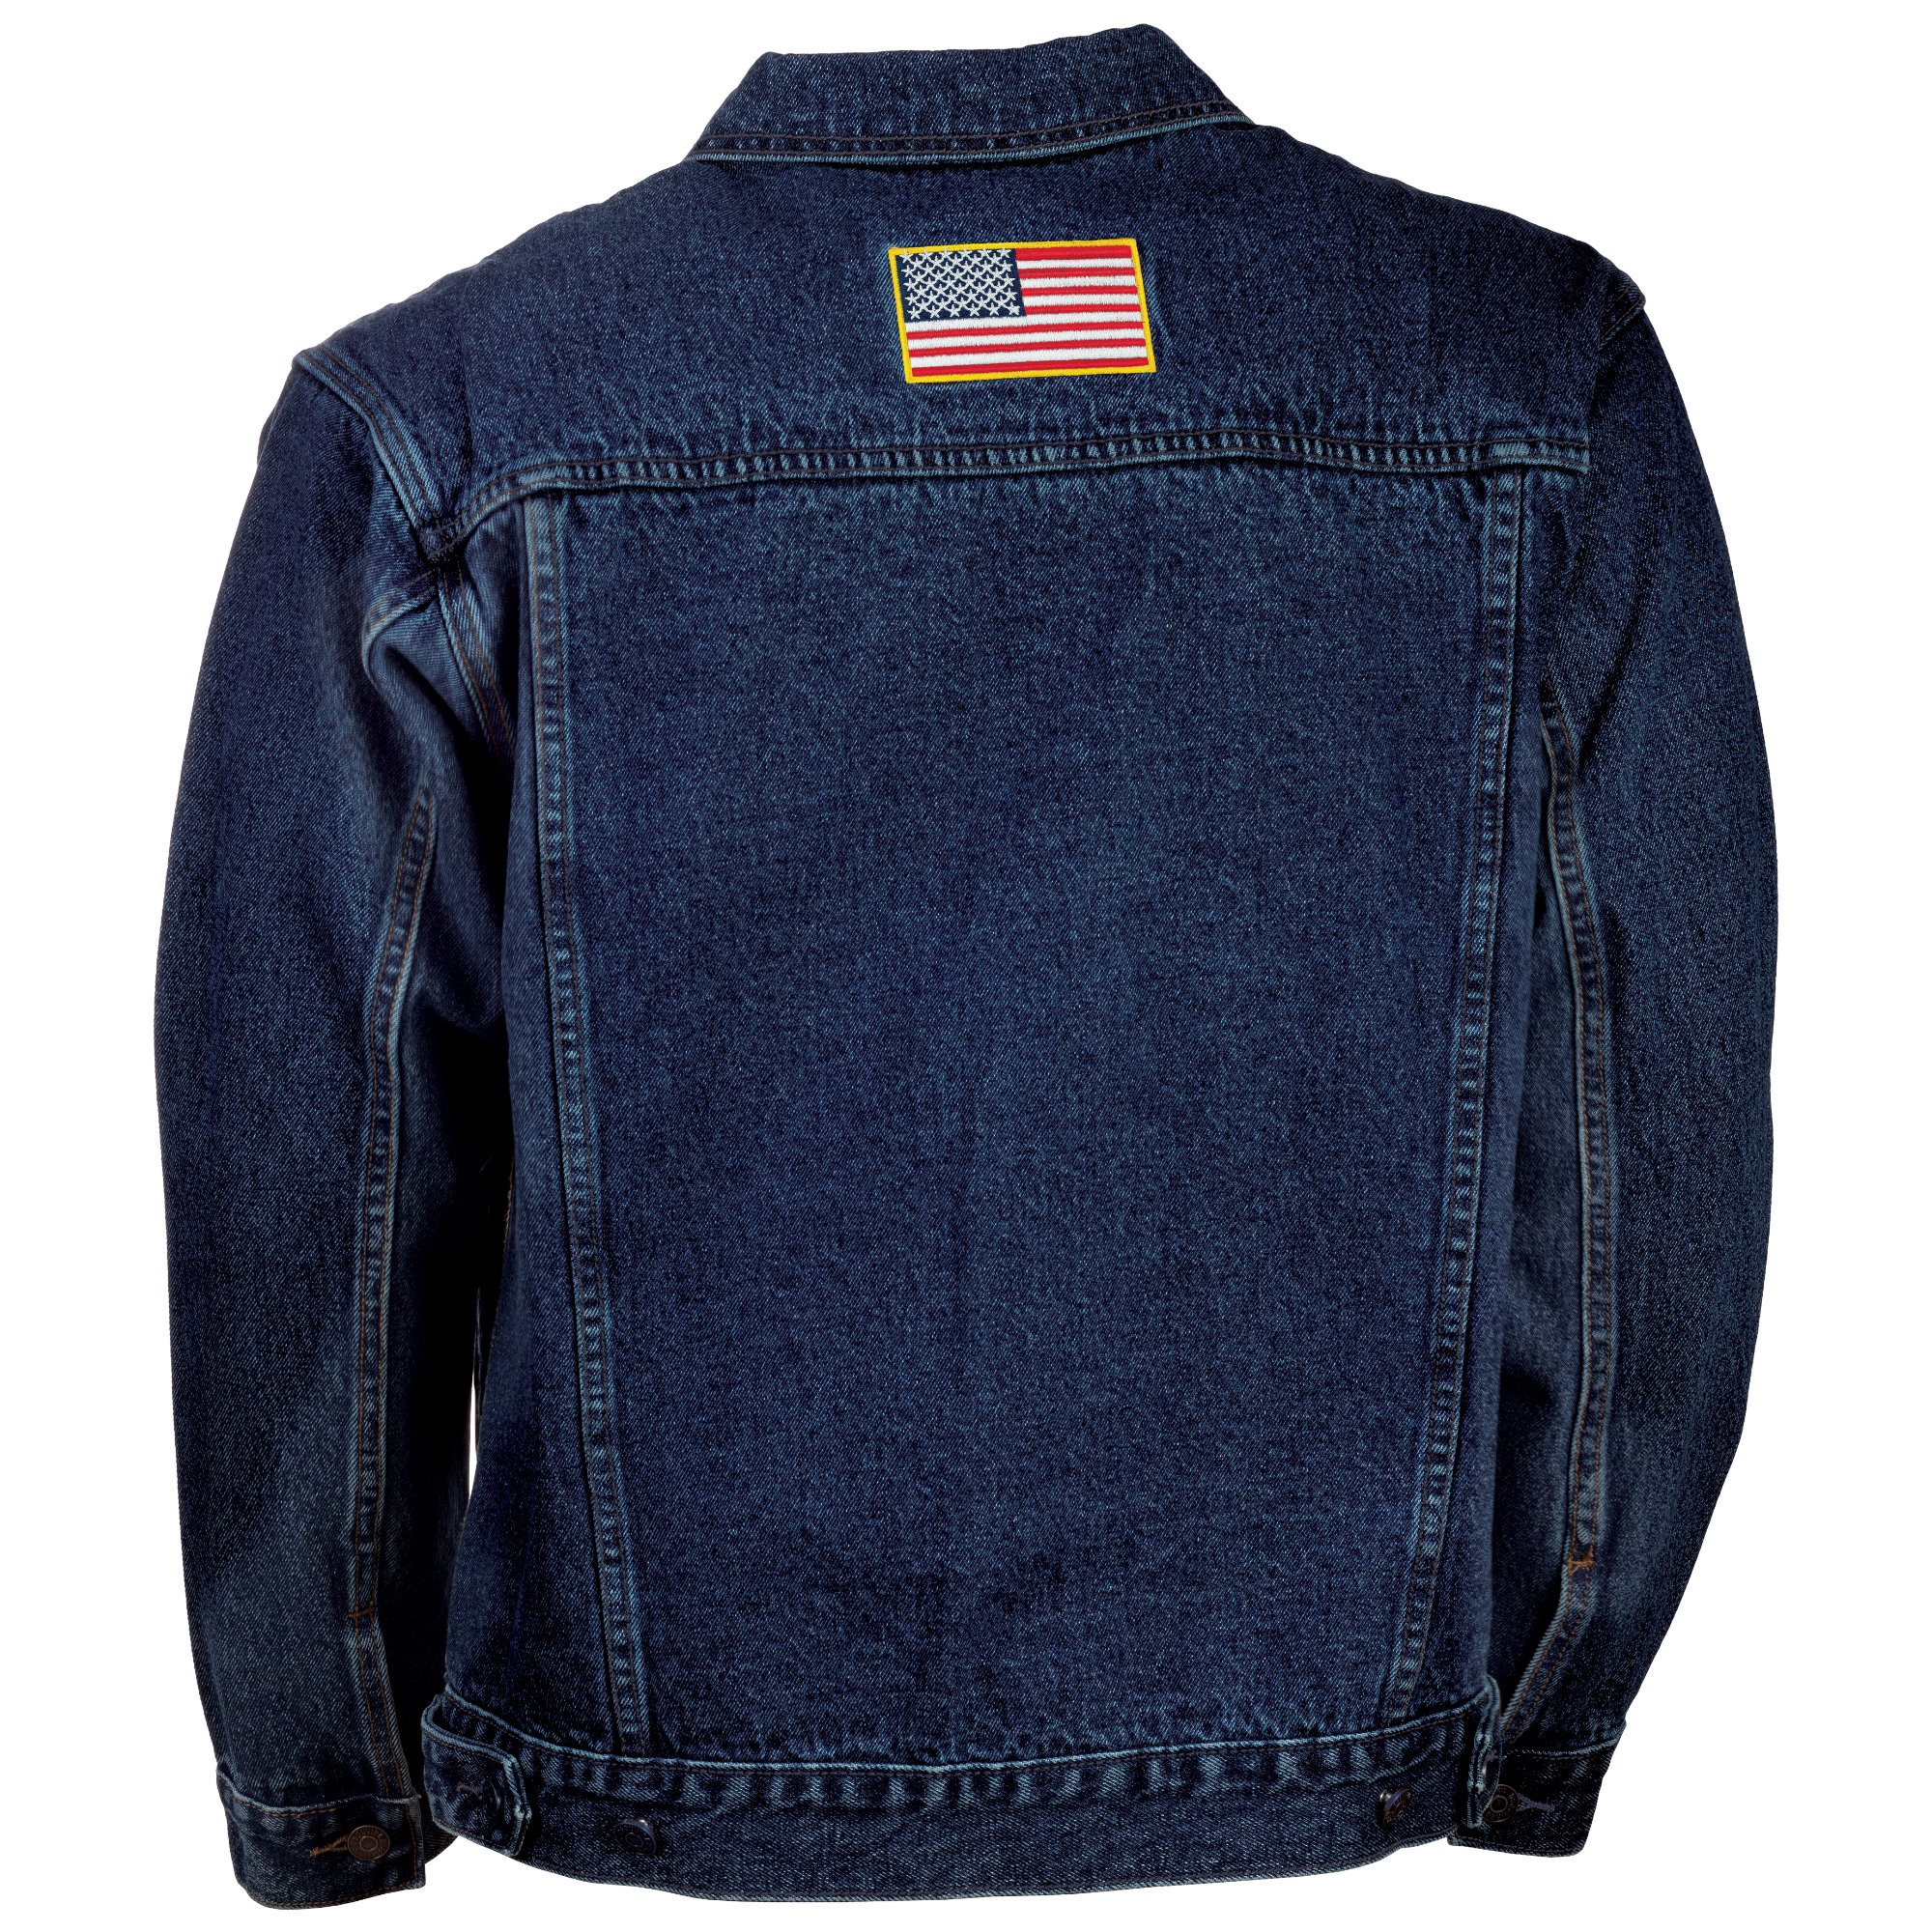 The Personalized Mens US Marines Denim Jacket 1365 0106 a main